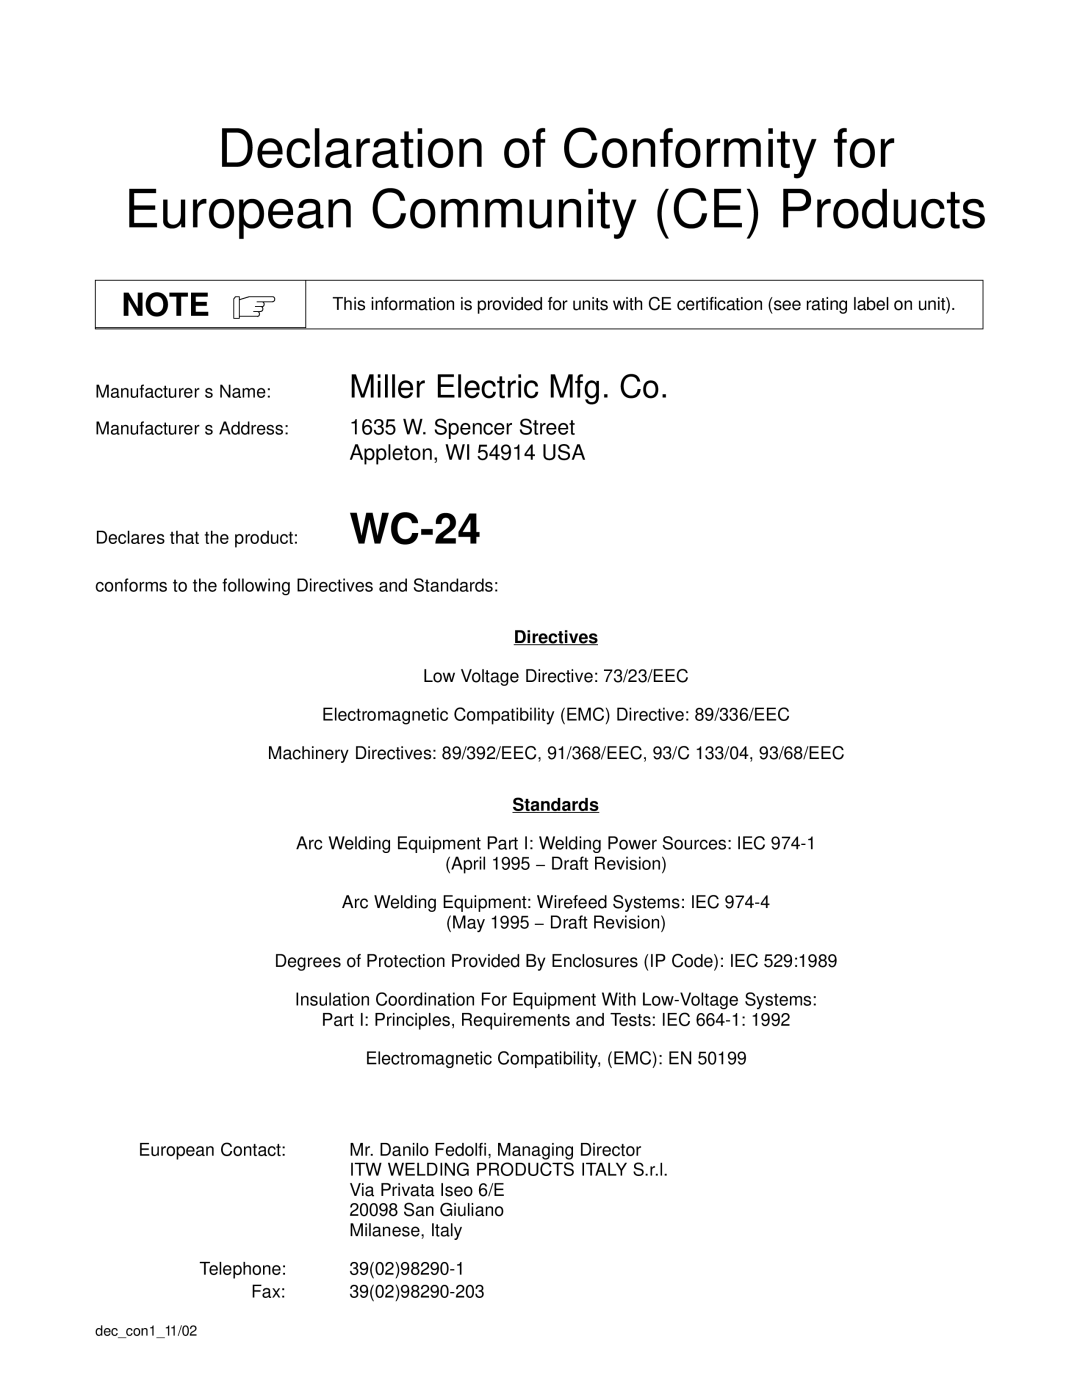 Miller Electric WC-24 manual Directives, Standards 